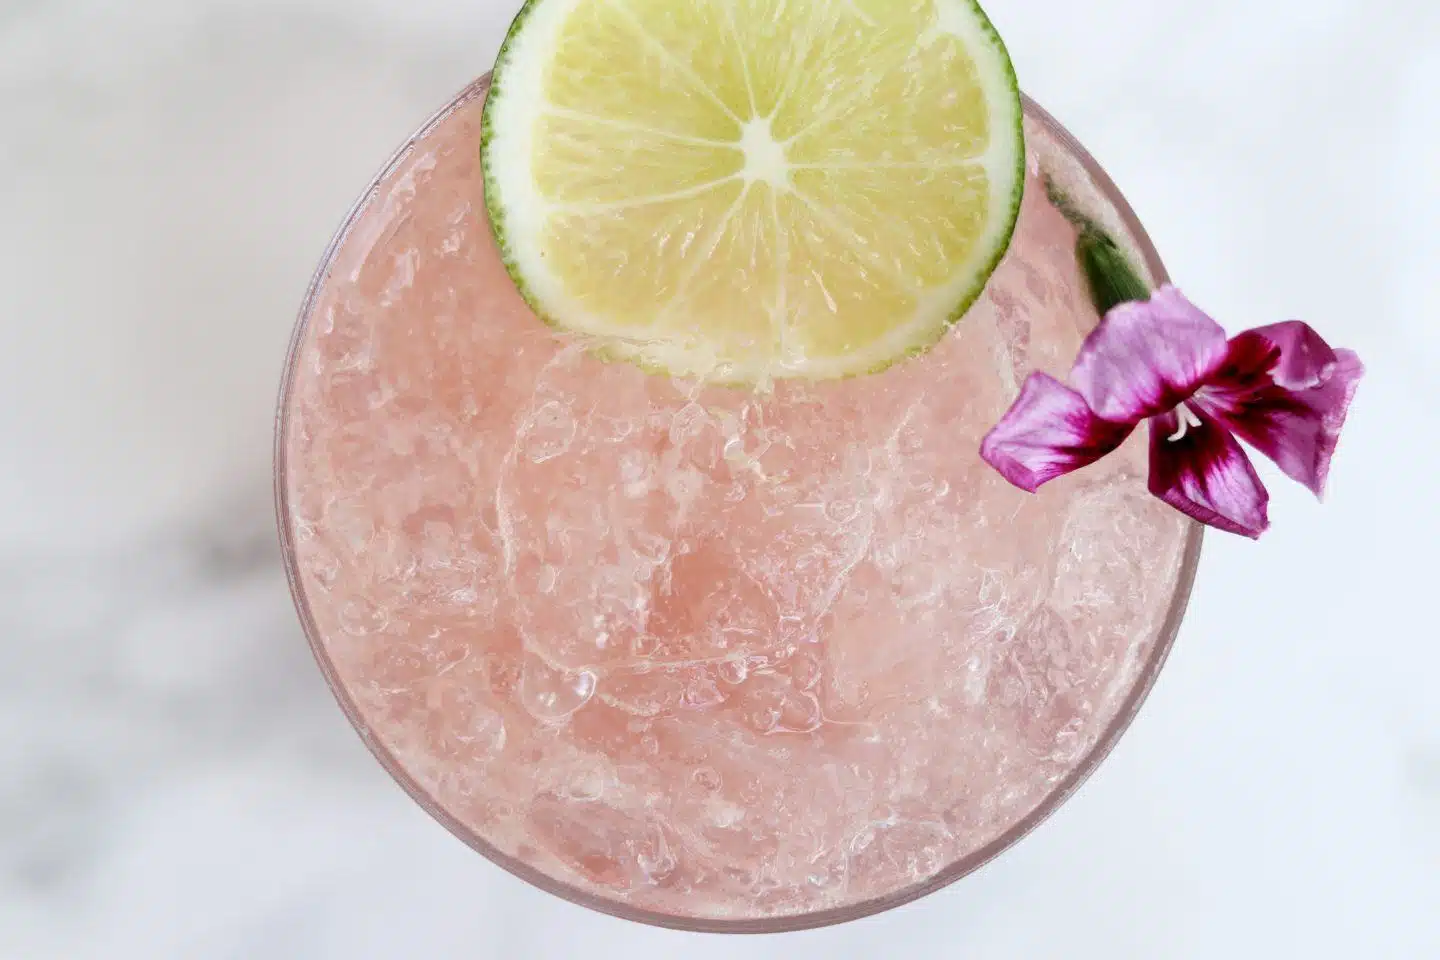 mocktail recipes to make this summer, by lifestyle blogger What The Fab